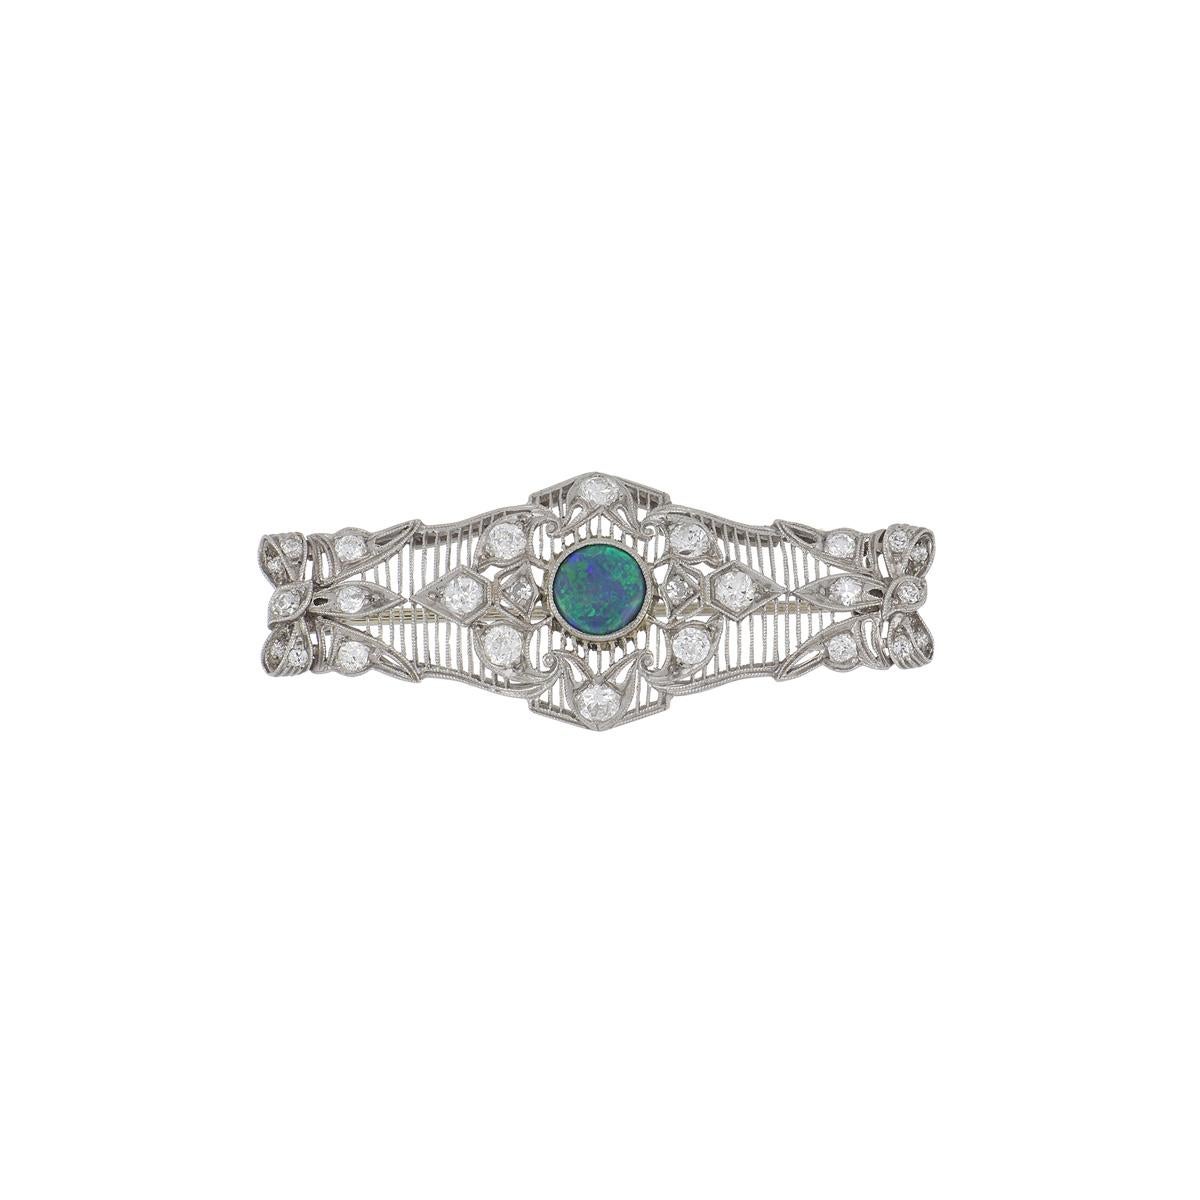 Art Deco filigree openwork rectangular shaped pin composed of platinum set with round diamonds, featuring a central round black opal. The pin contains 1.37 total carats of diamonds, G-I color and VS1-I1 clarity.  Circa 1920.